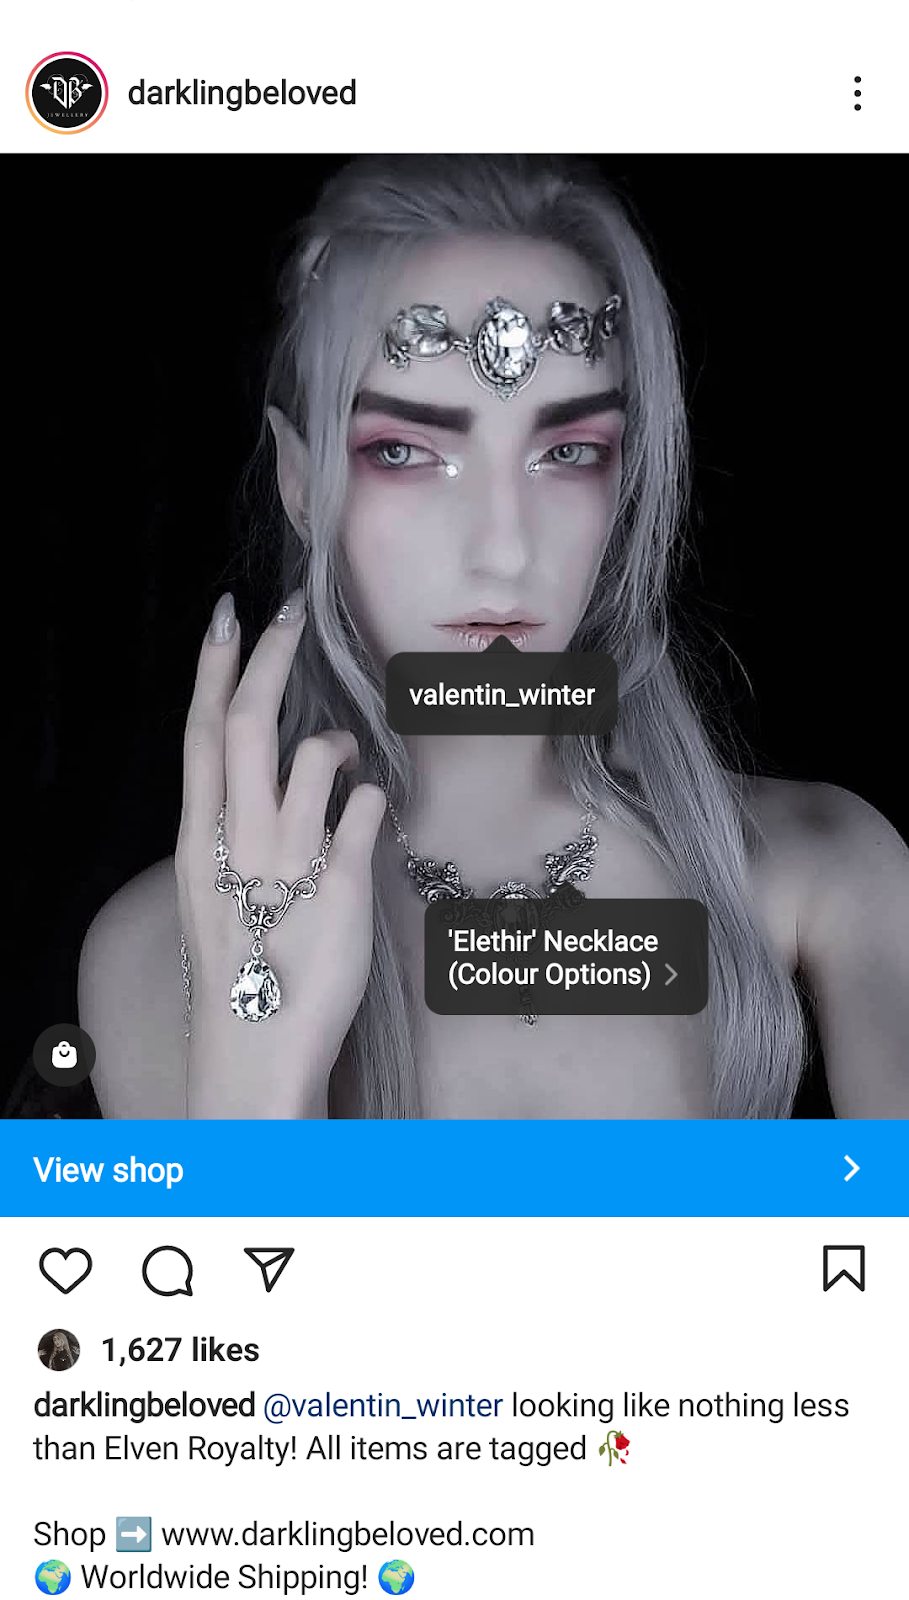 Screenshot of a shoppable Instagram post by a brand showing a creator wearing its products